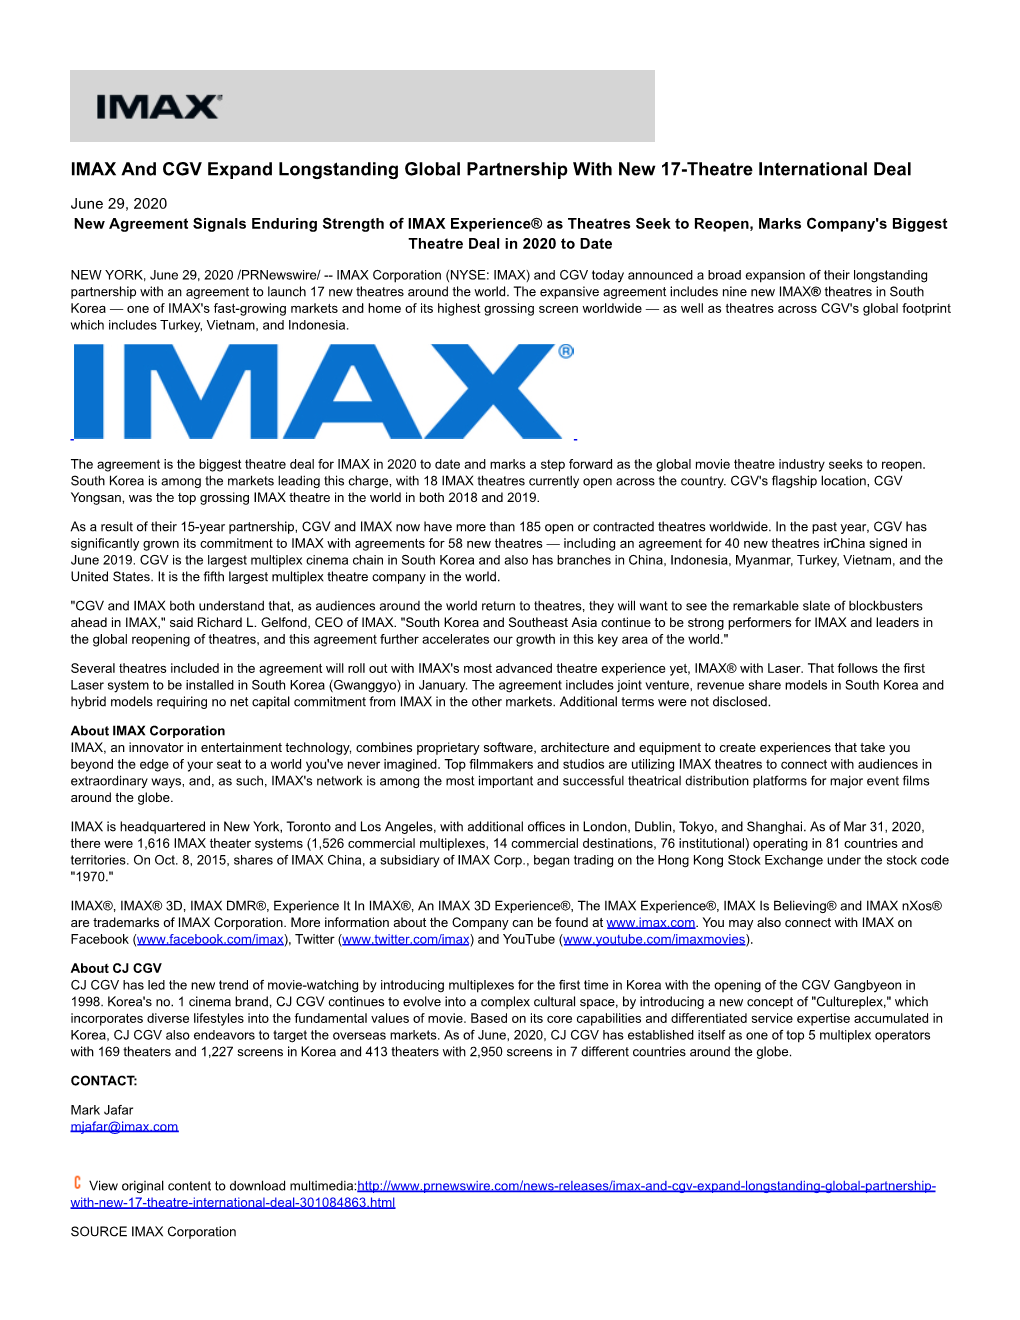 IMAX and CGV Expand Longstanding Global Partnership with New 17-Theatre International Deal